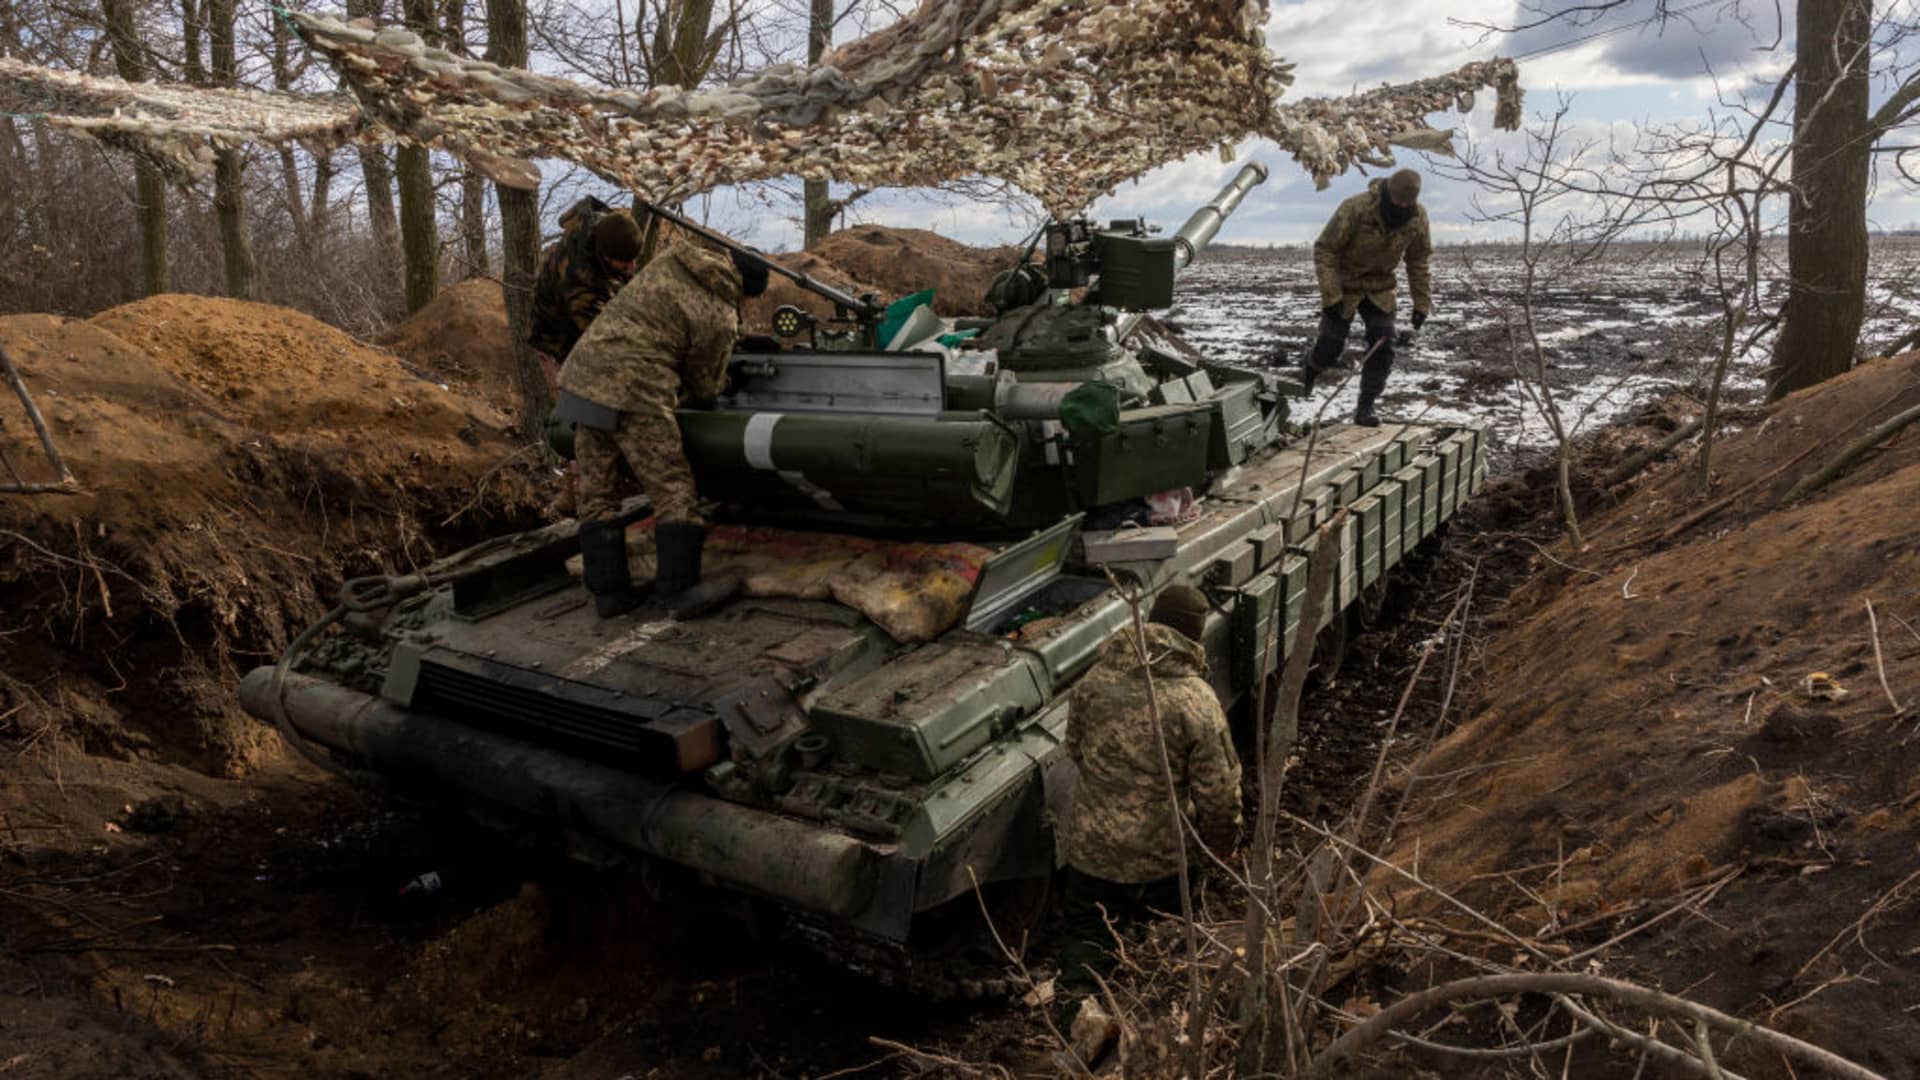 Ukrainian Marines prepare their T-64 tank for action while dug in to a treeline on February 15, 2023 in the Donbass region of eastern Ukraine. 